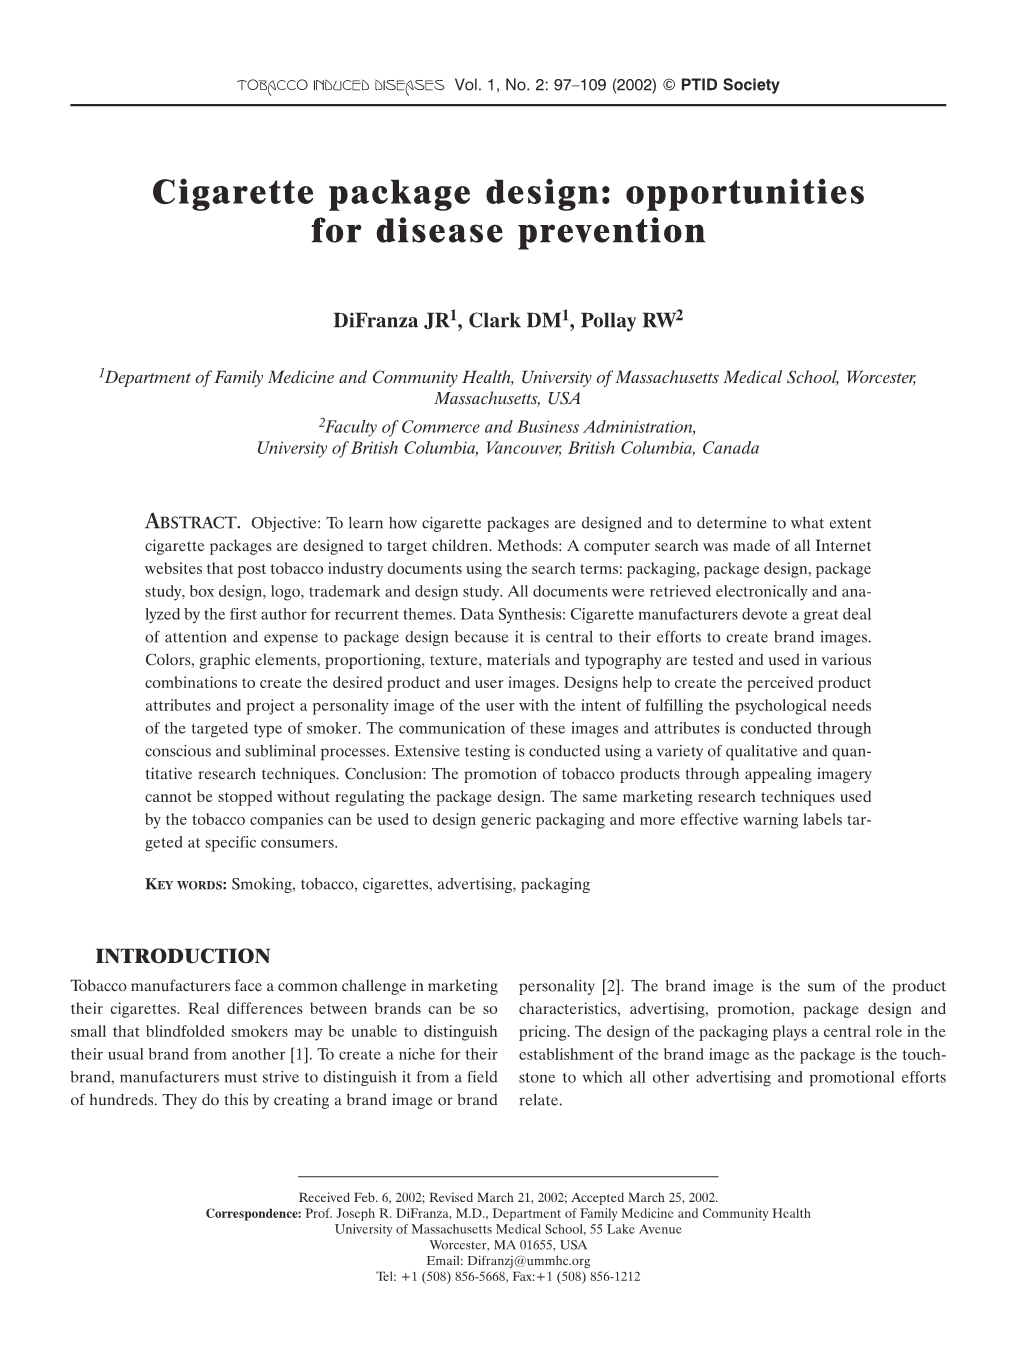 Cigarette Package Design: Opportunities for Disease Prevention